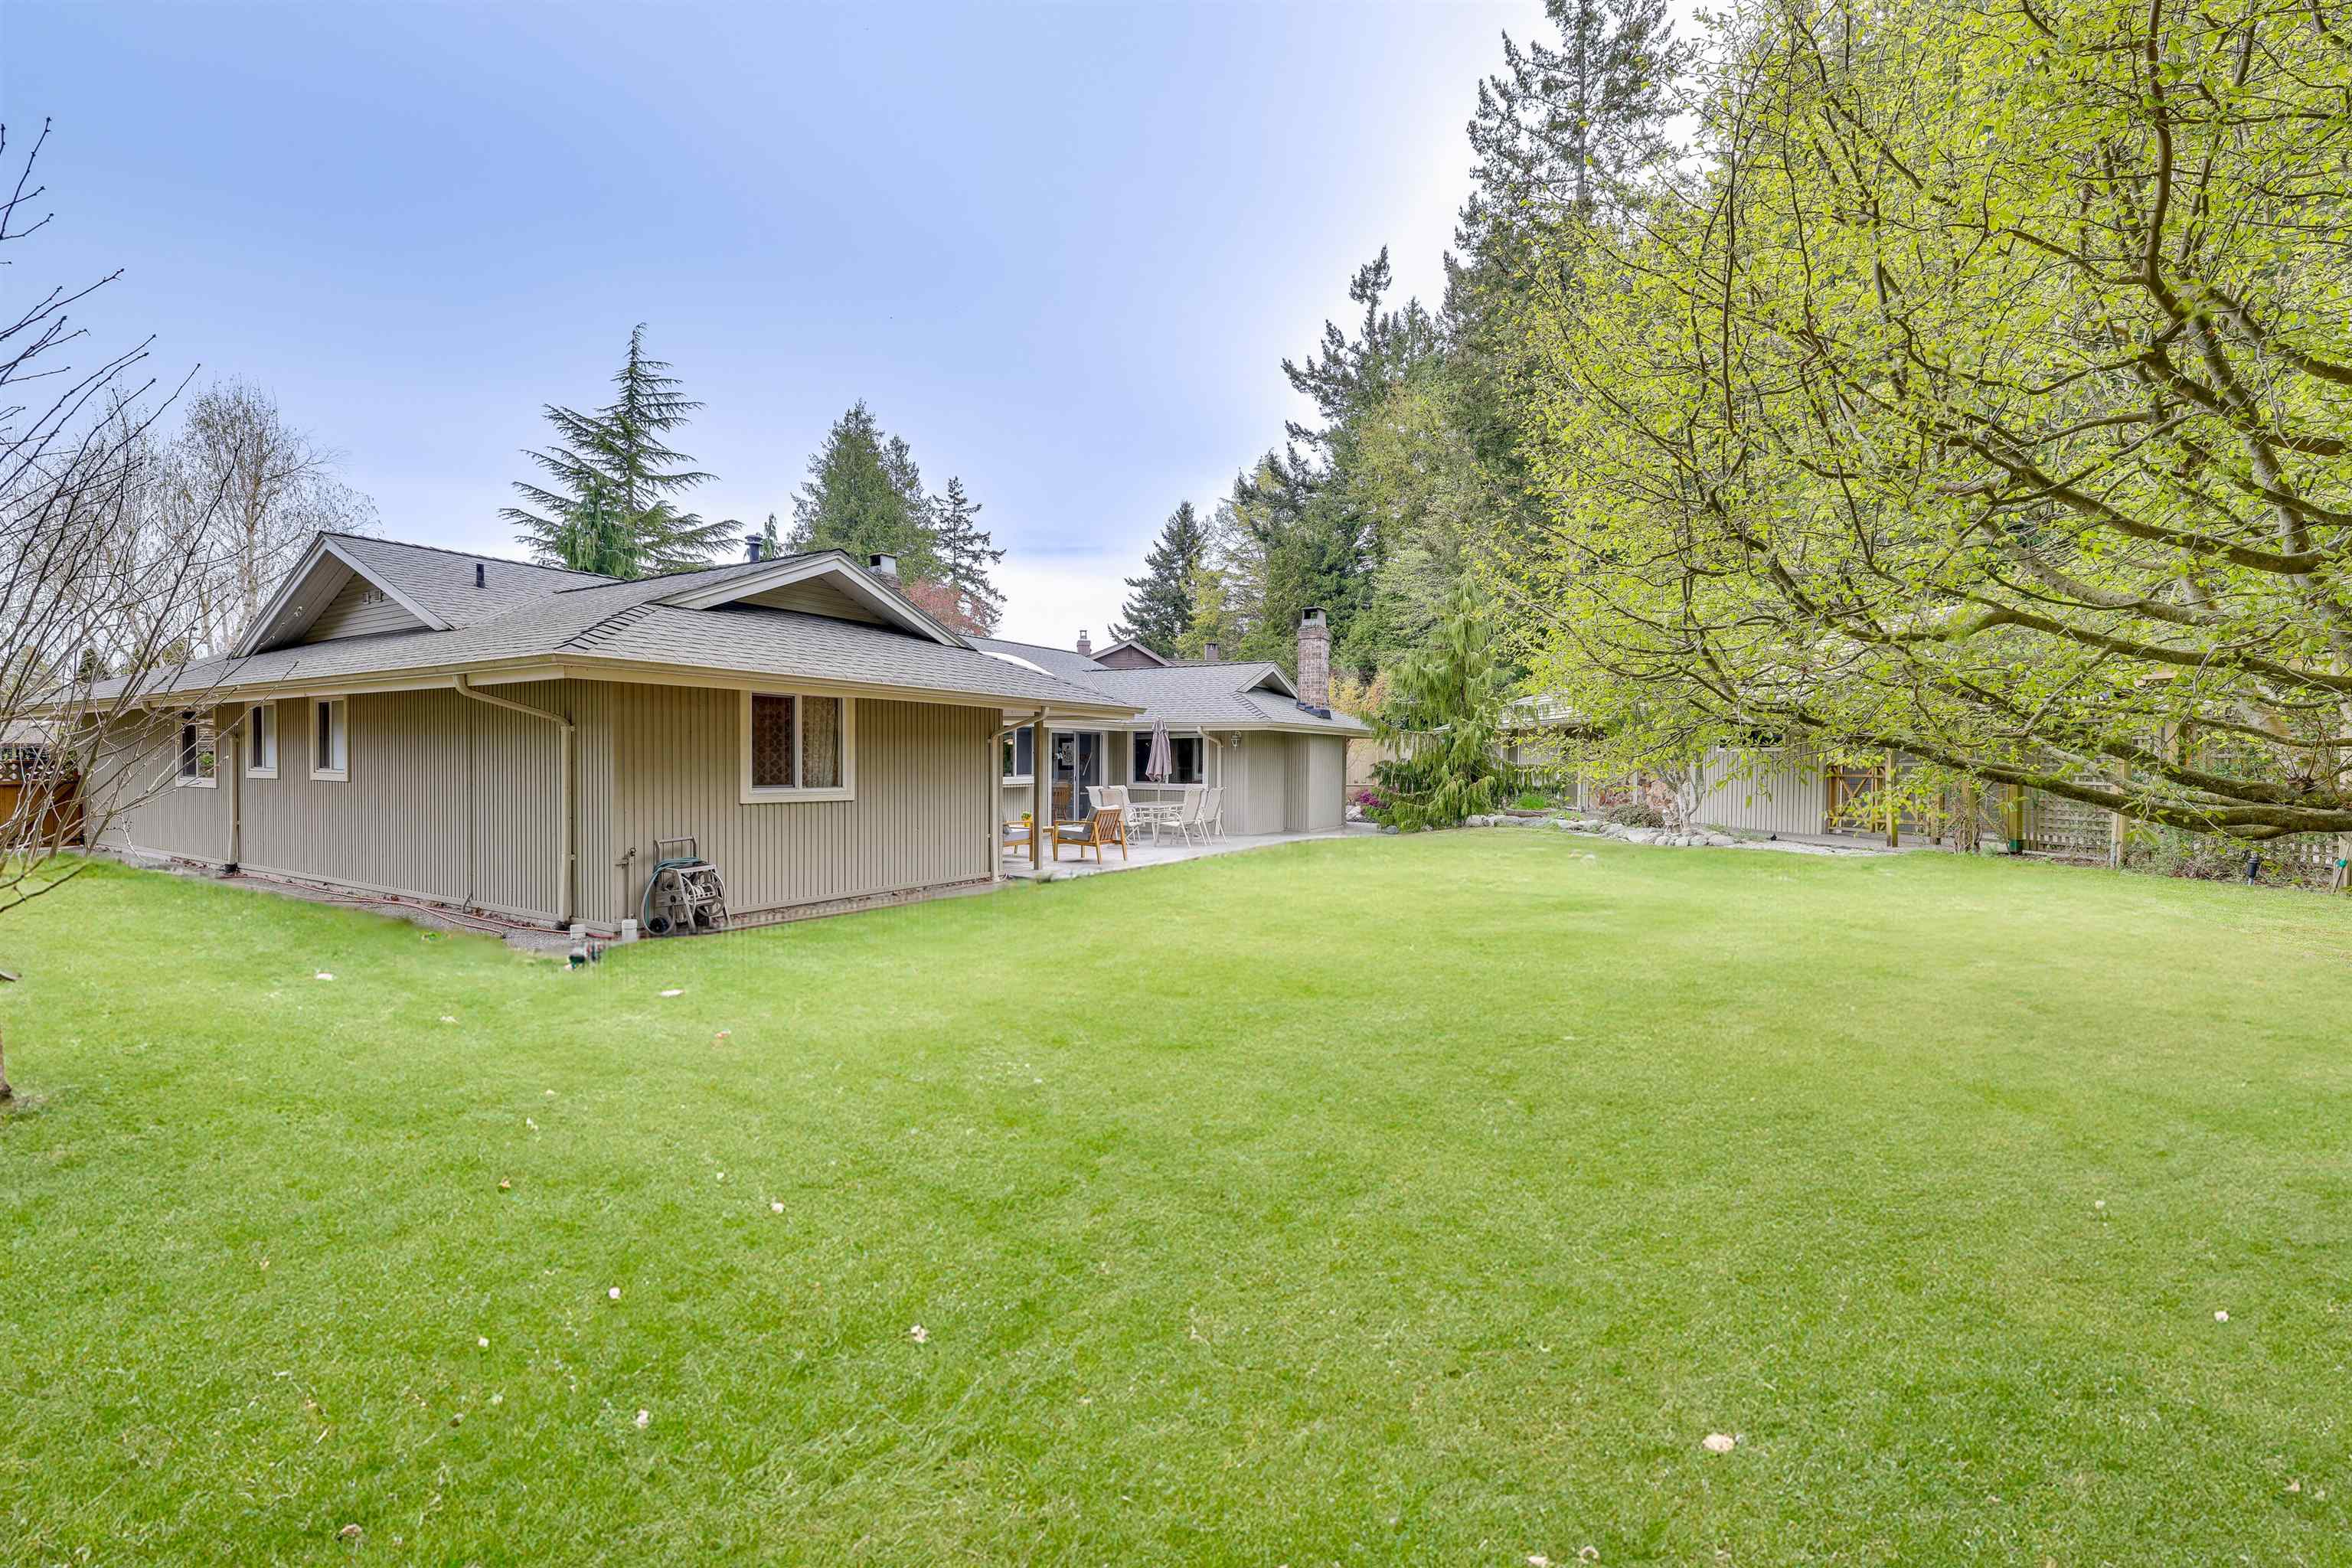 95 DEERFIELD PLACE, Delta, BC, V4M 2X3 (262891862)